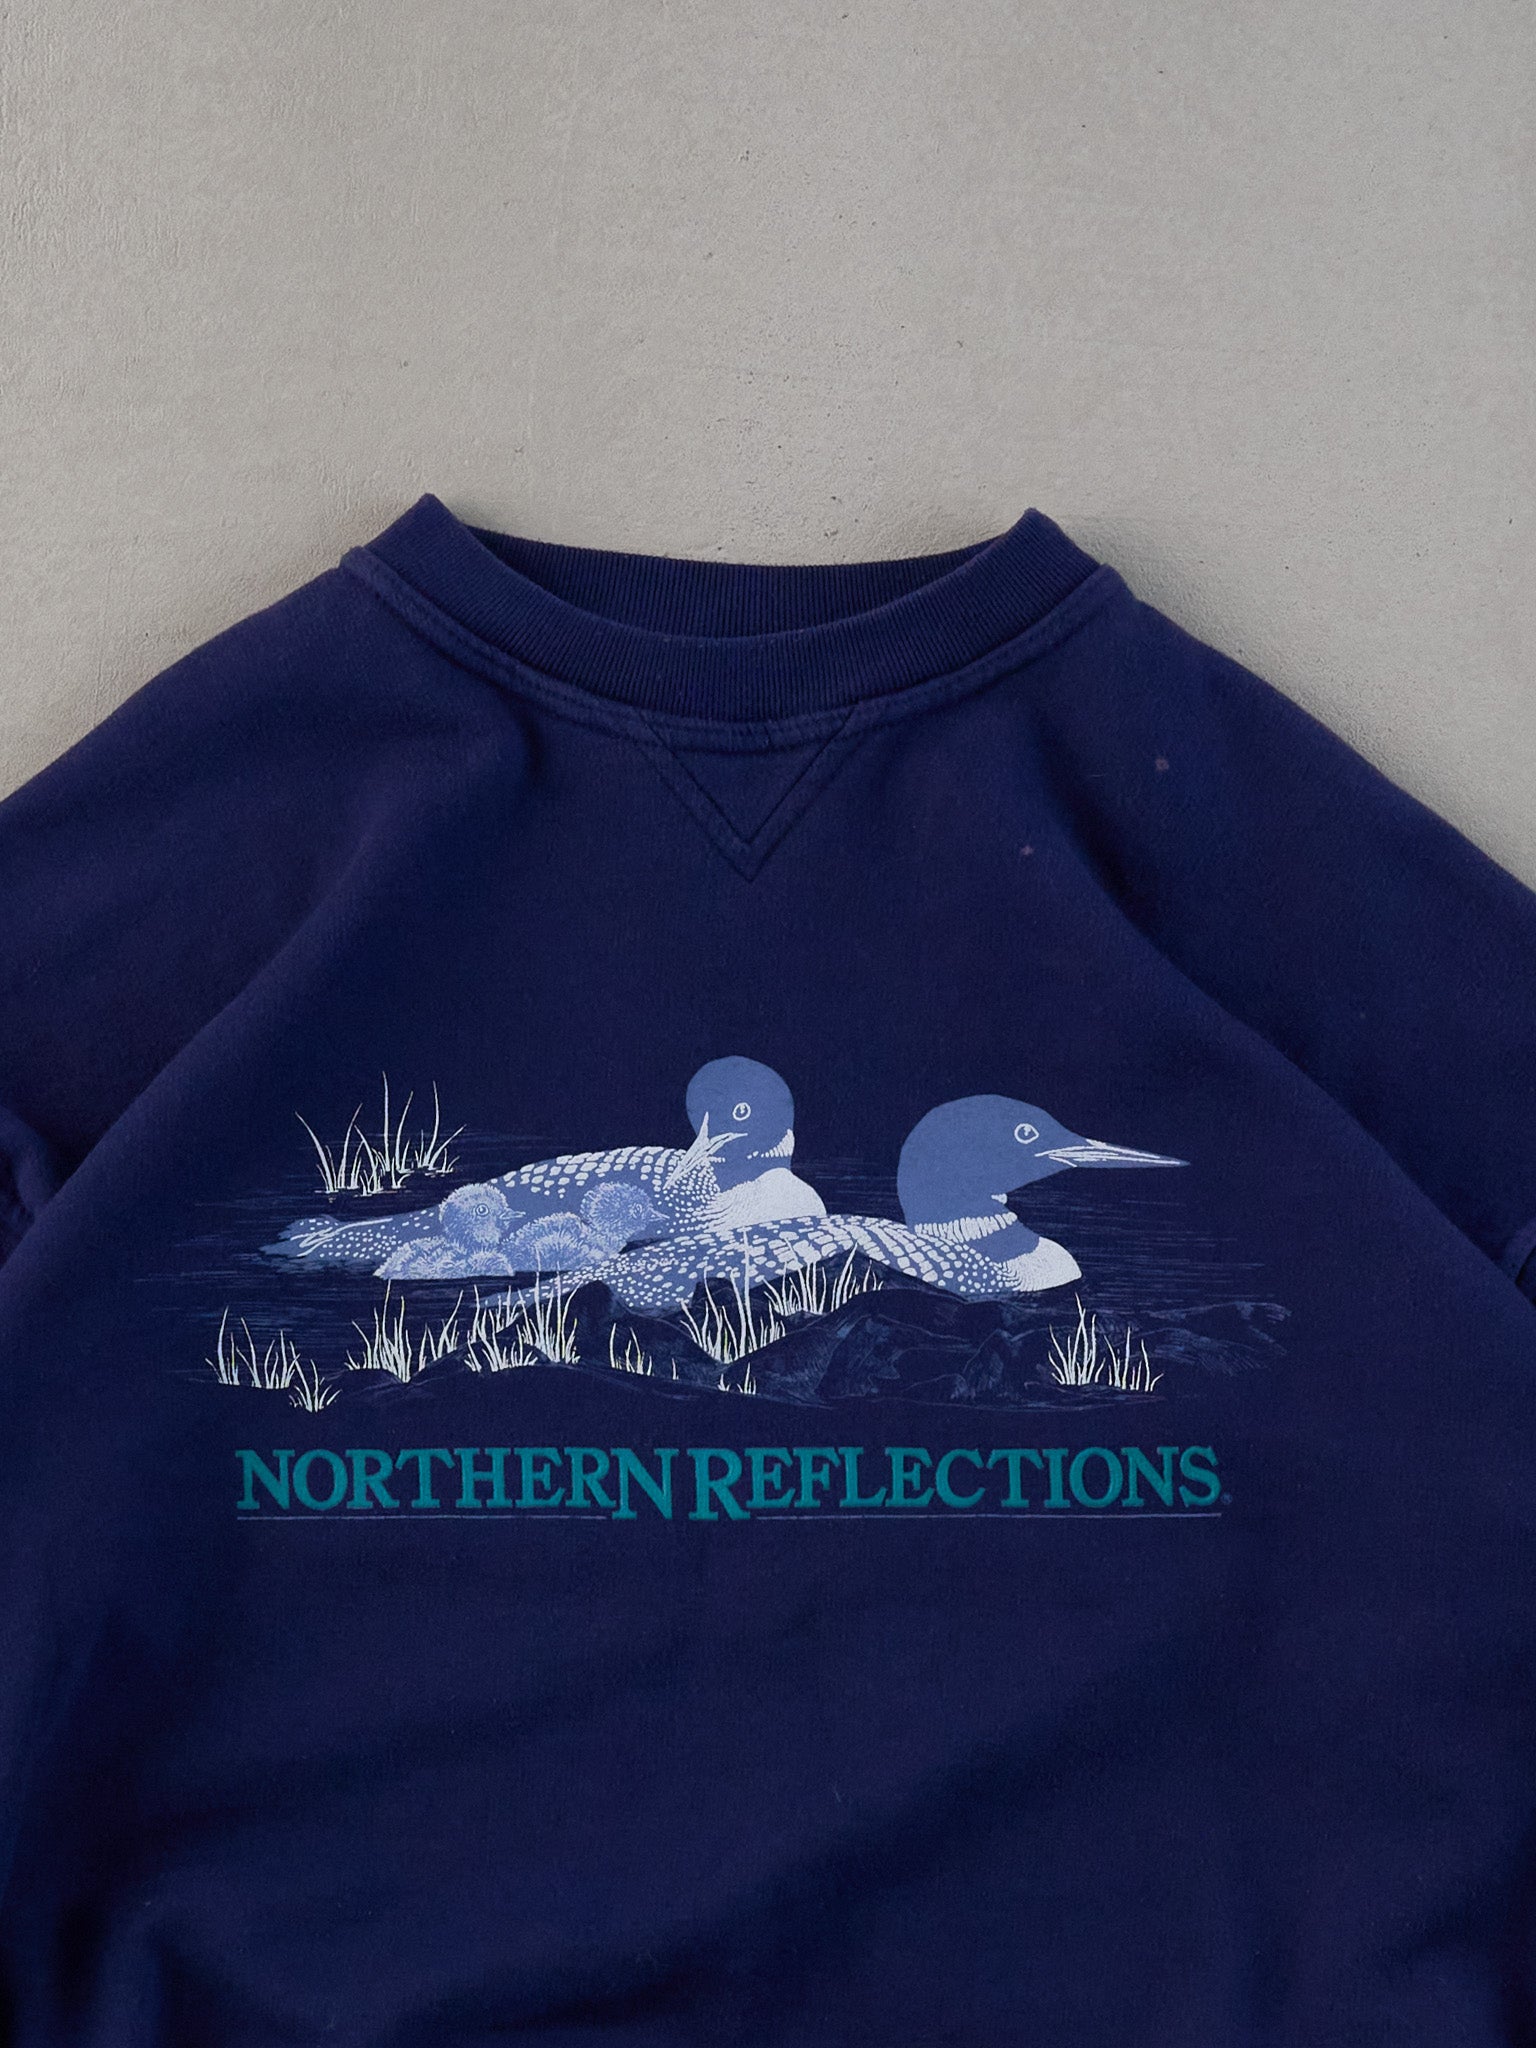 Vintage 90s Navy Blue Northern Reflections Graphic Crewneck (M)